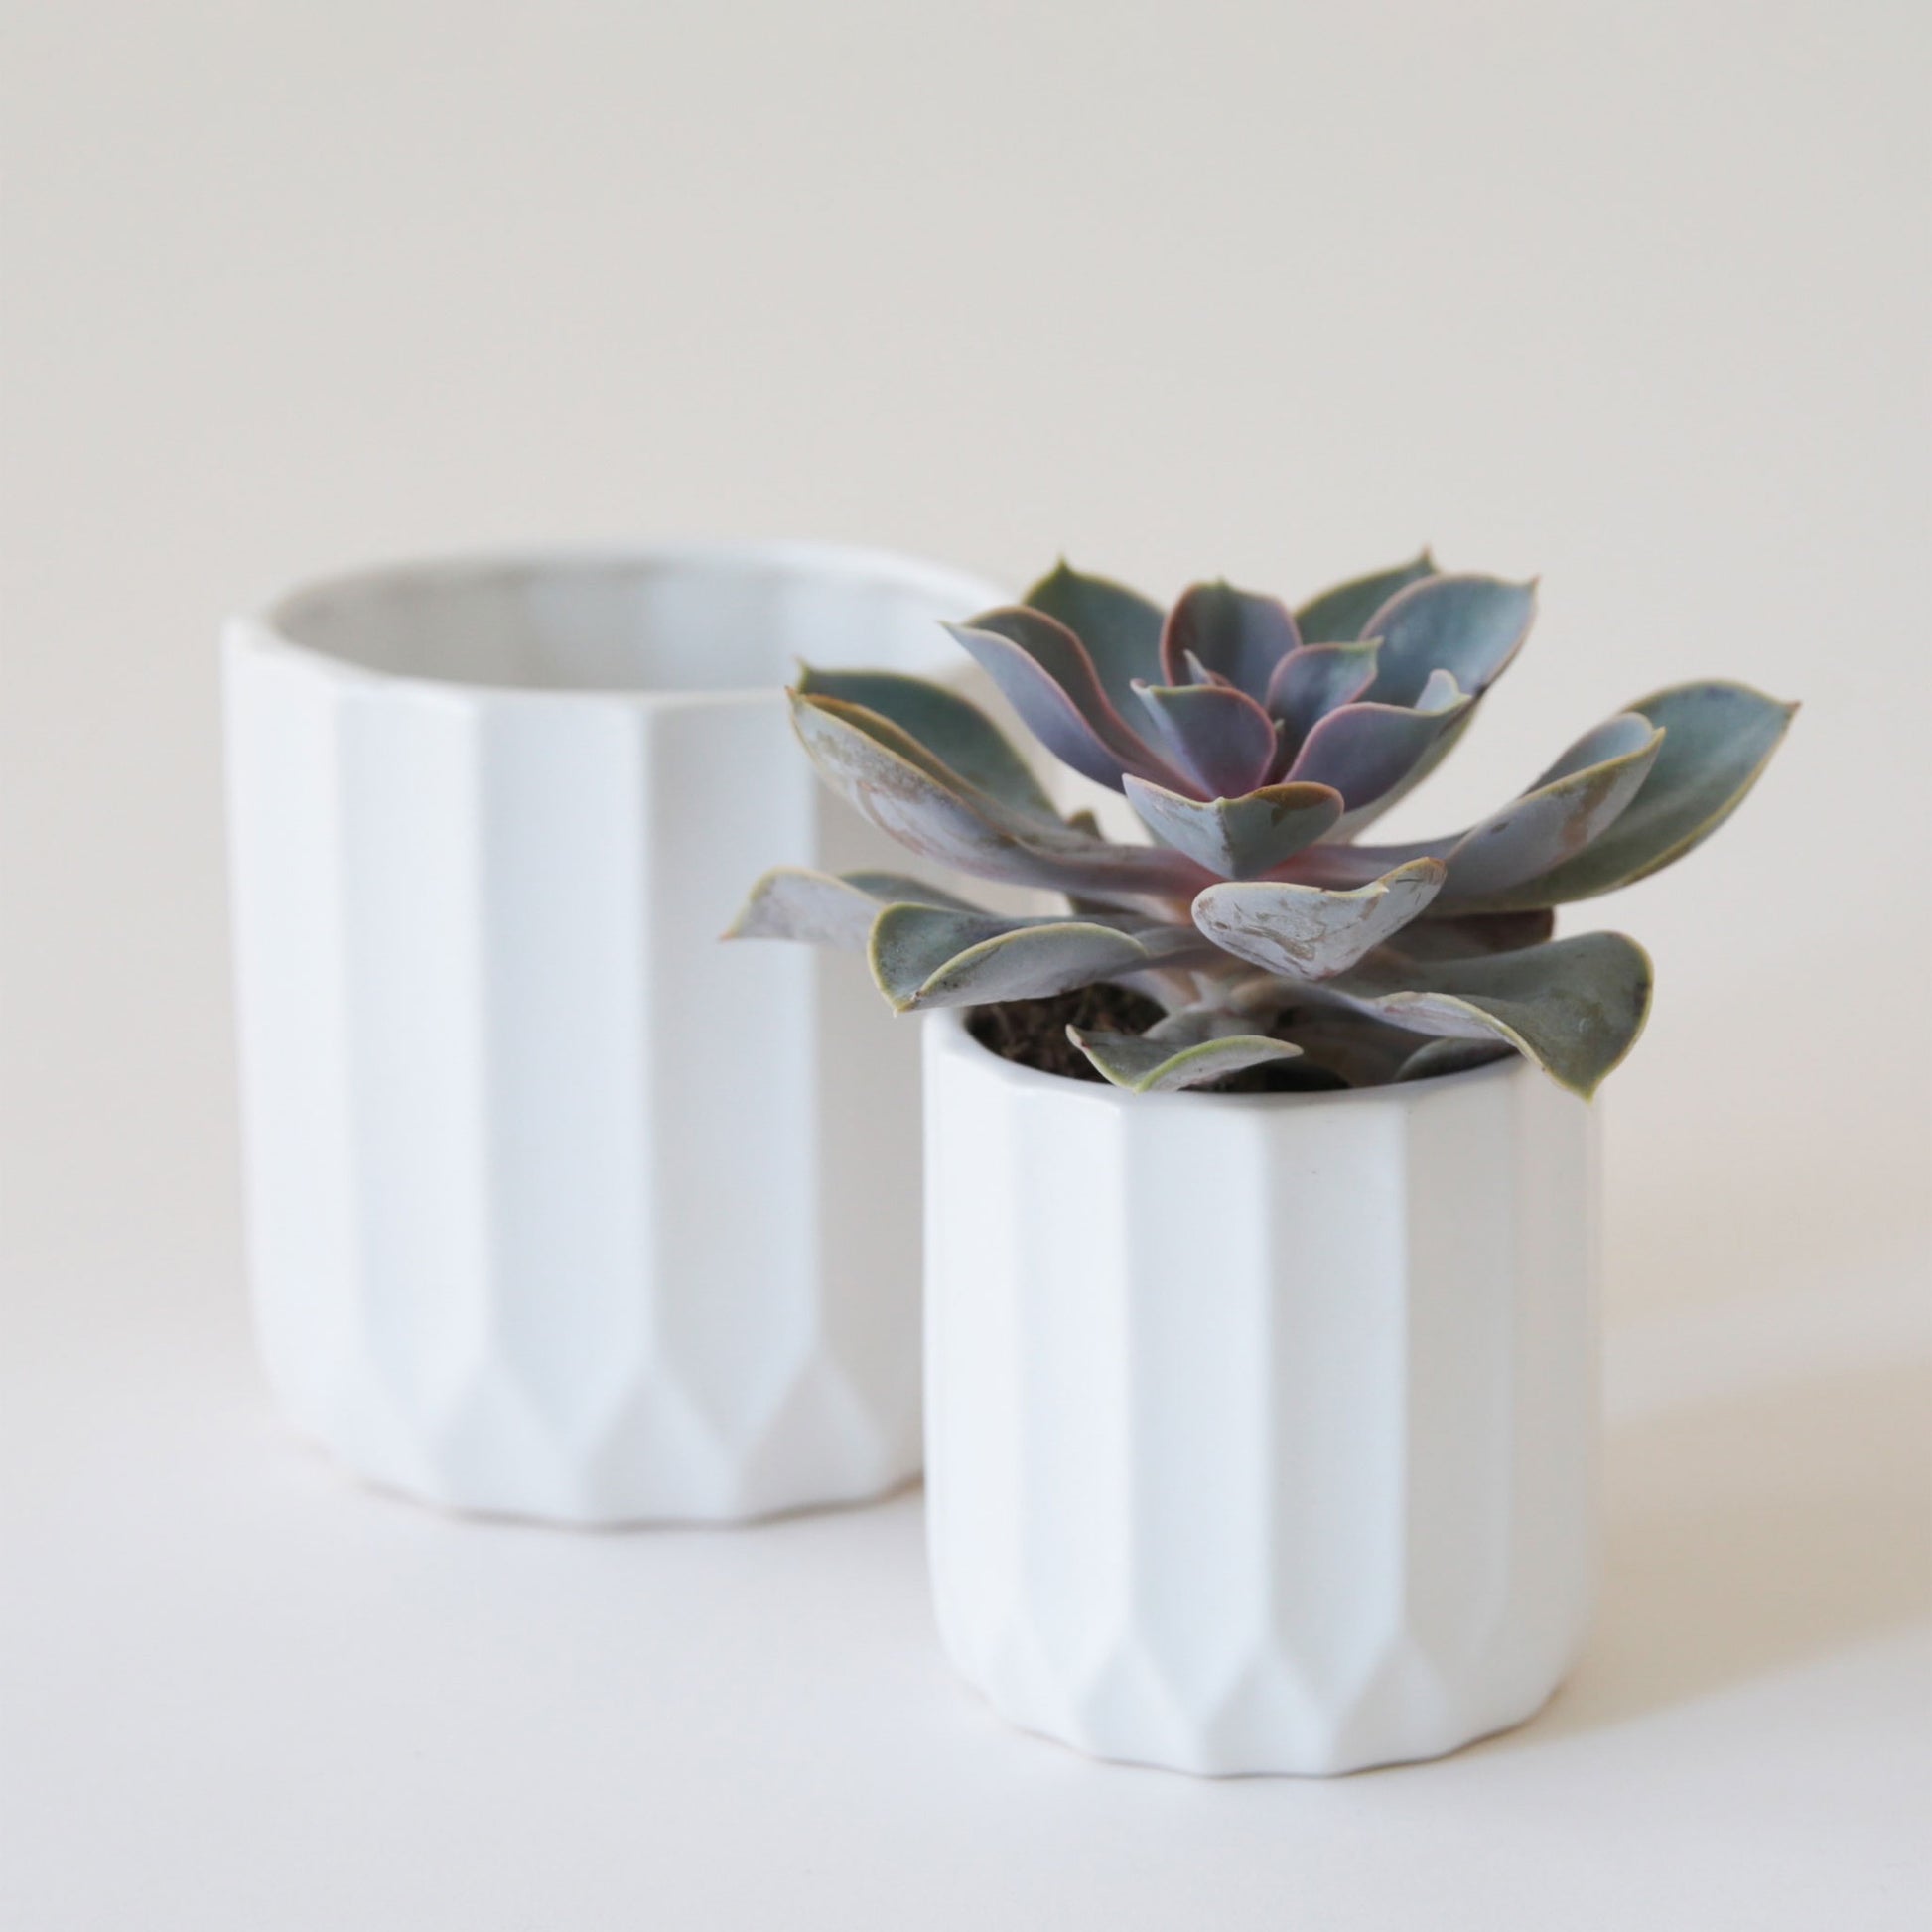 On a white background is two different sized white ceramic pots with a fluted detail on the sides. The smaller of the two pots is holding a single succulent inside.